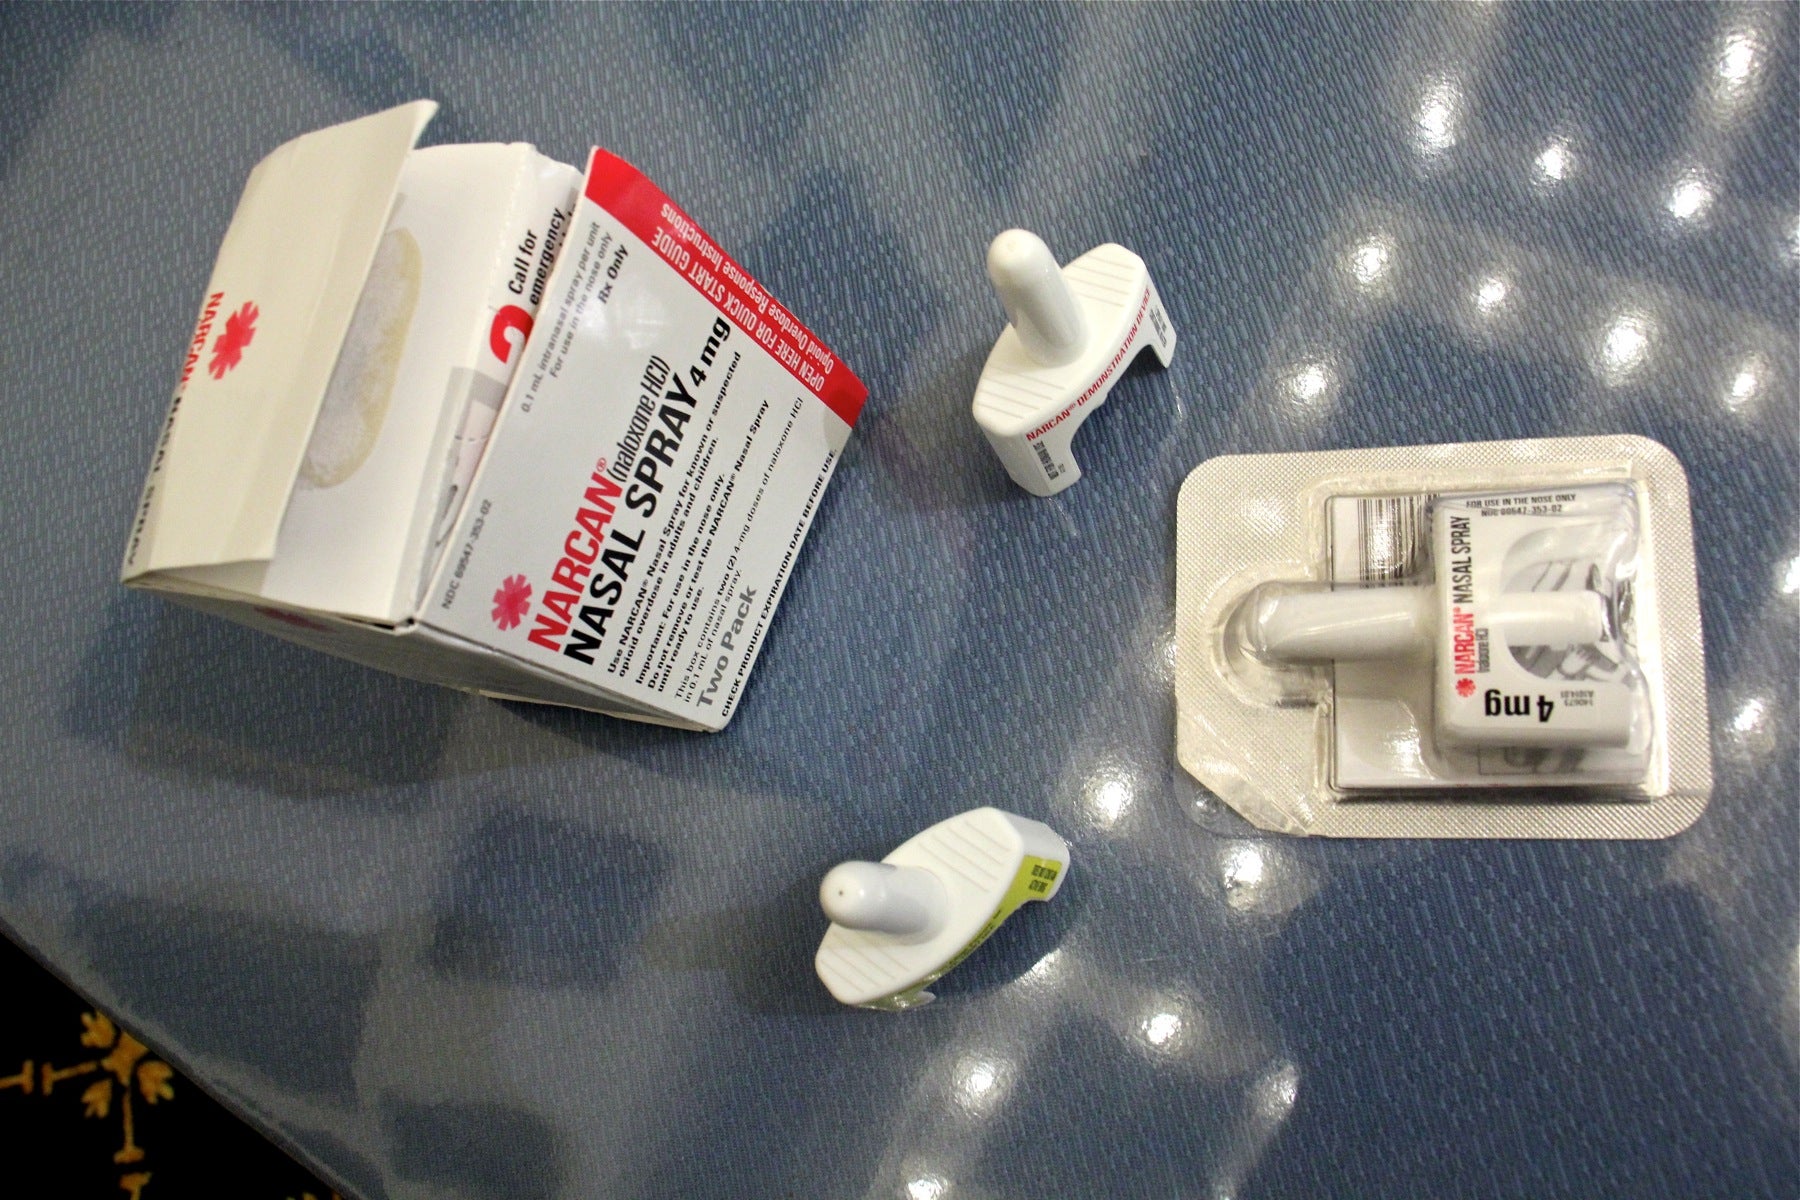 New Jersey to offer free naloxone at pharmacies on June 18 - WHYY